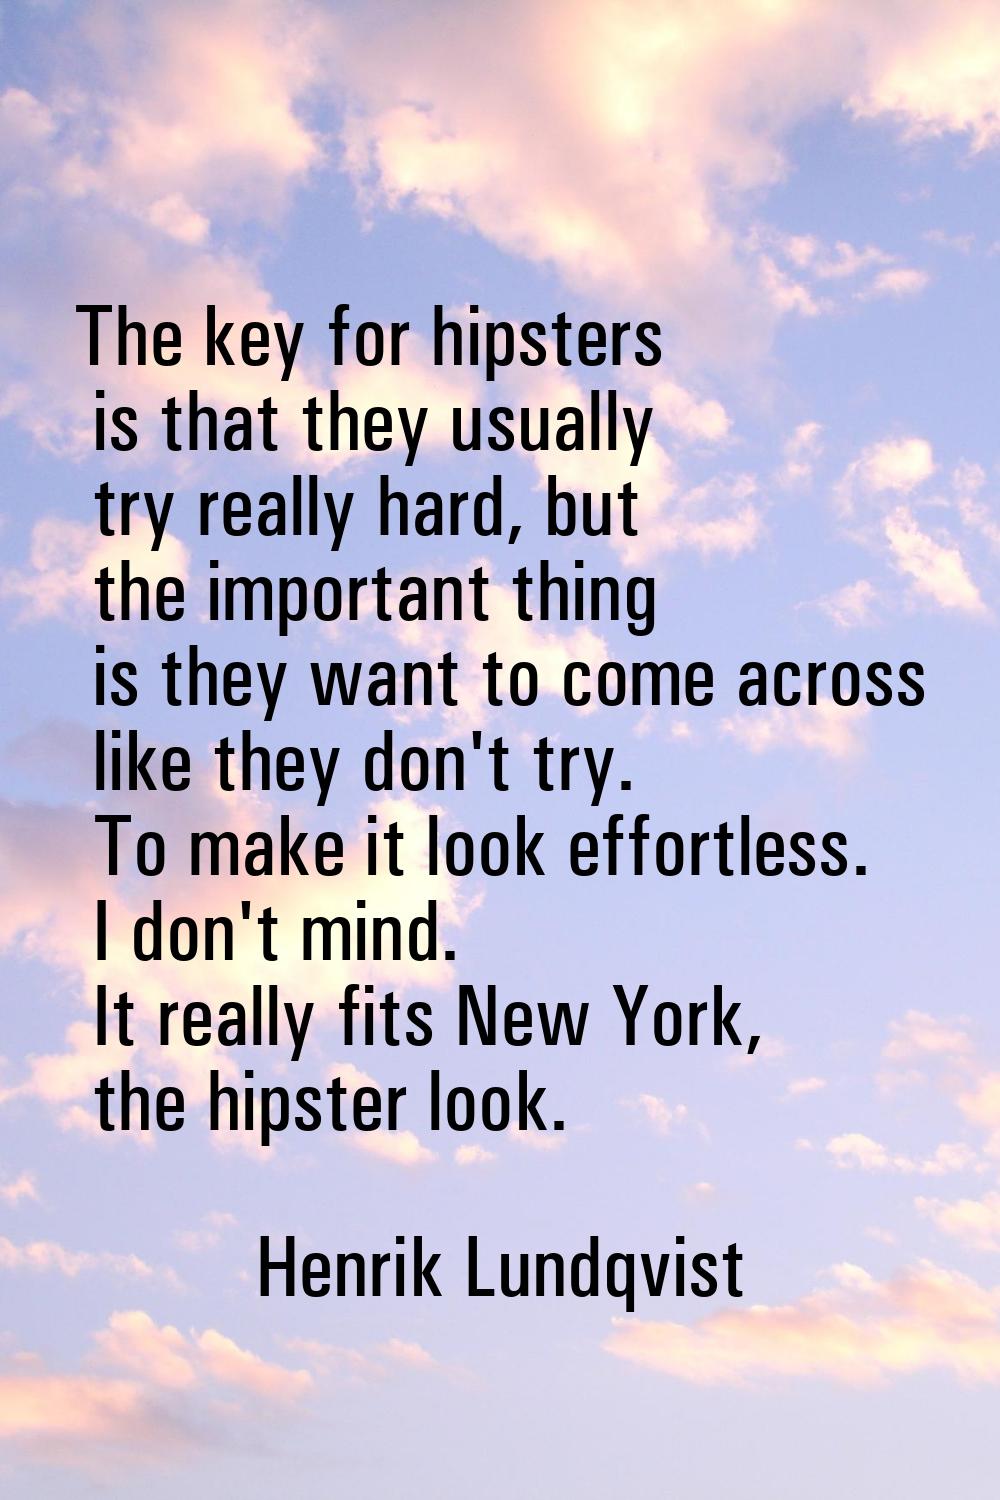 The key for hipsters is that they usually try really hard, but the important thing is they want to 